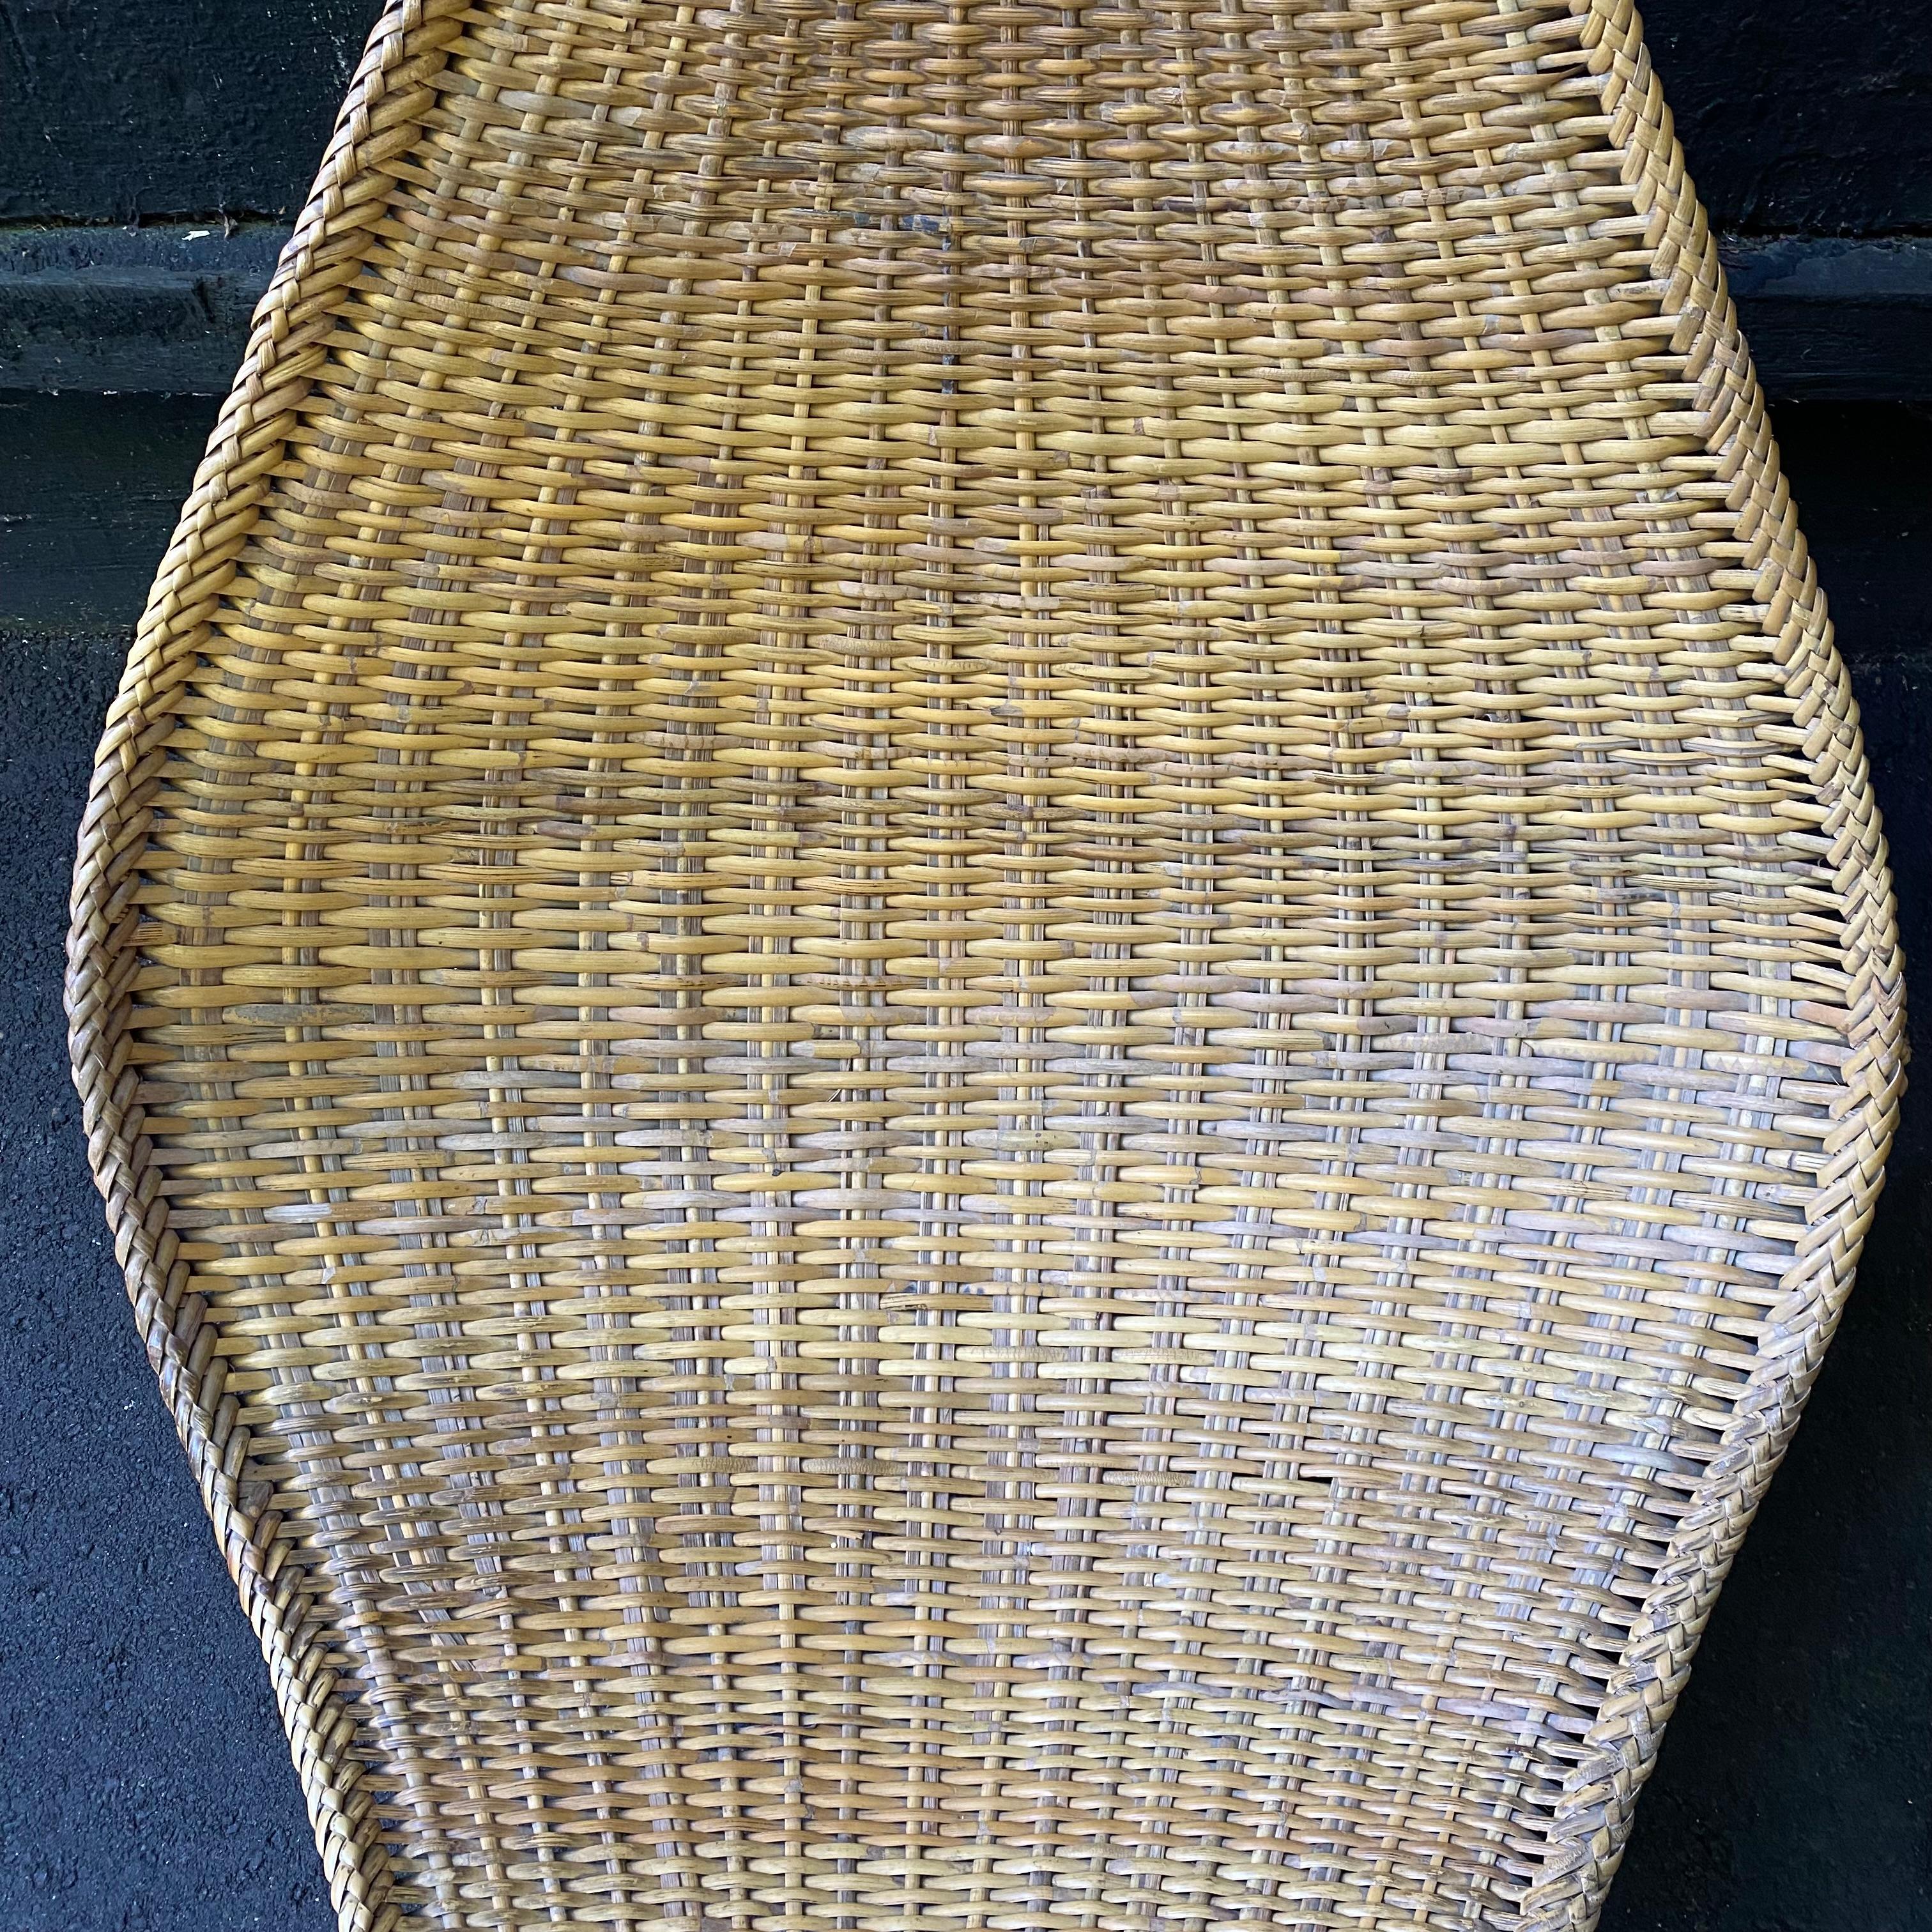 Mid-Century Modern John Risley Hand-Woven Rattan Cane and Iron Duyan Lounge Chair for Ficks Reed